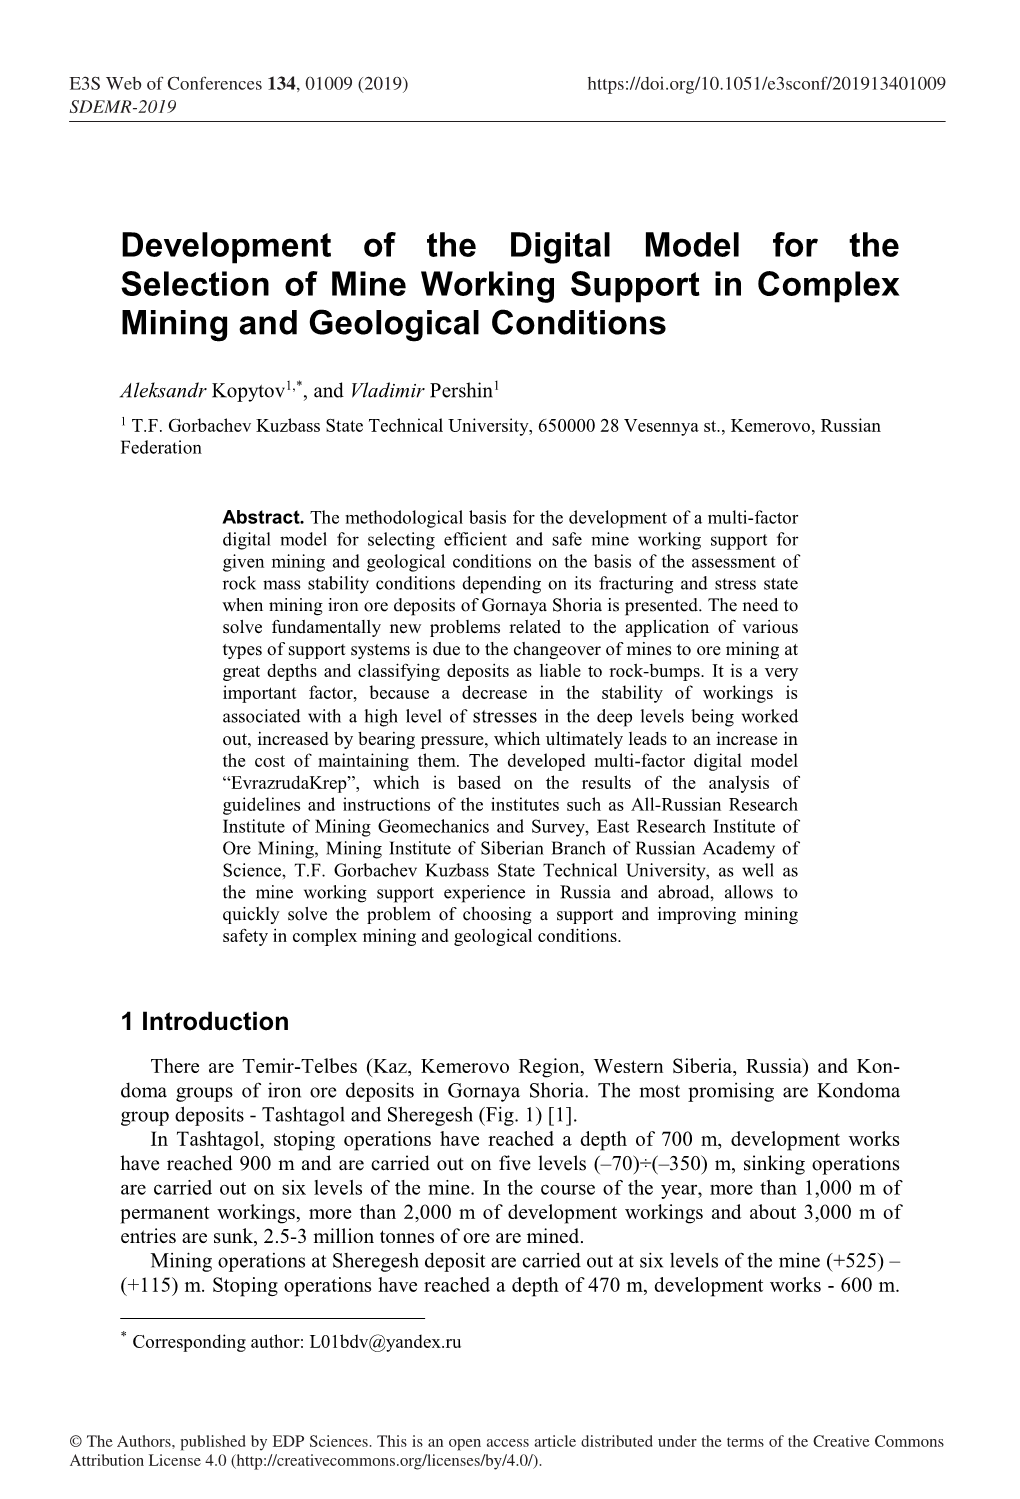 Development of the Digital Model for the Selection of Mine Working Support in Complex Mining and Geological Conditions